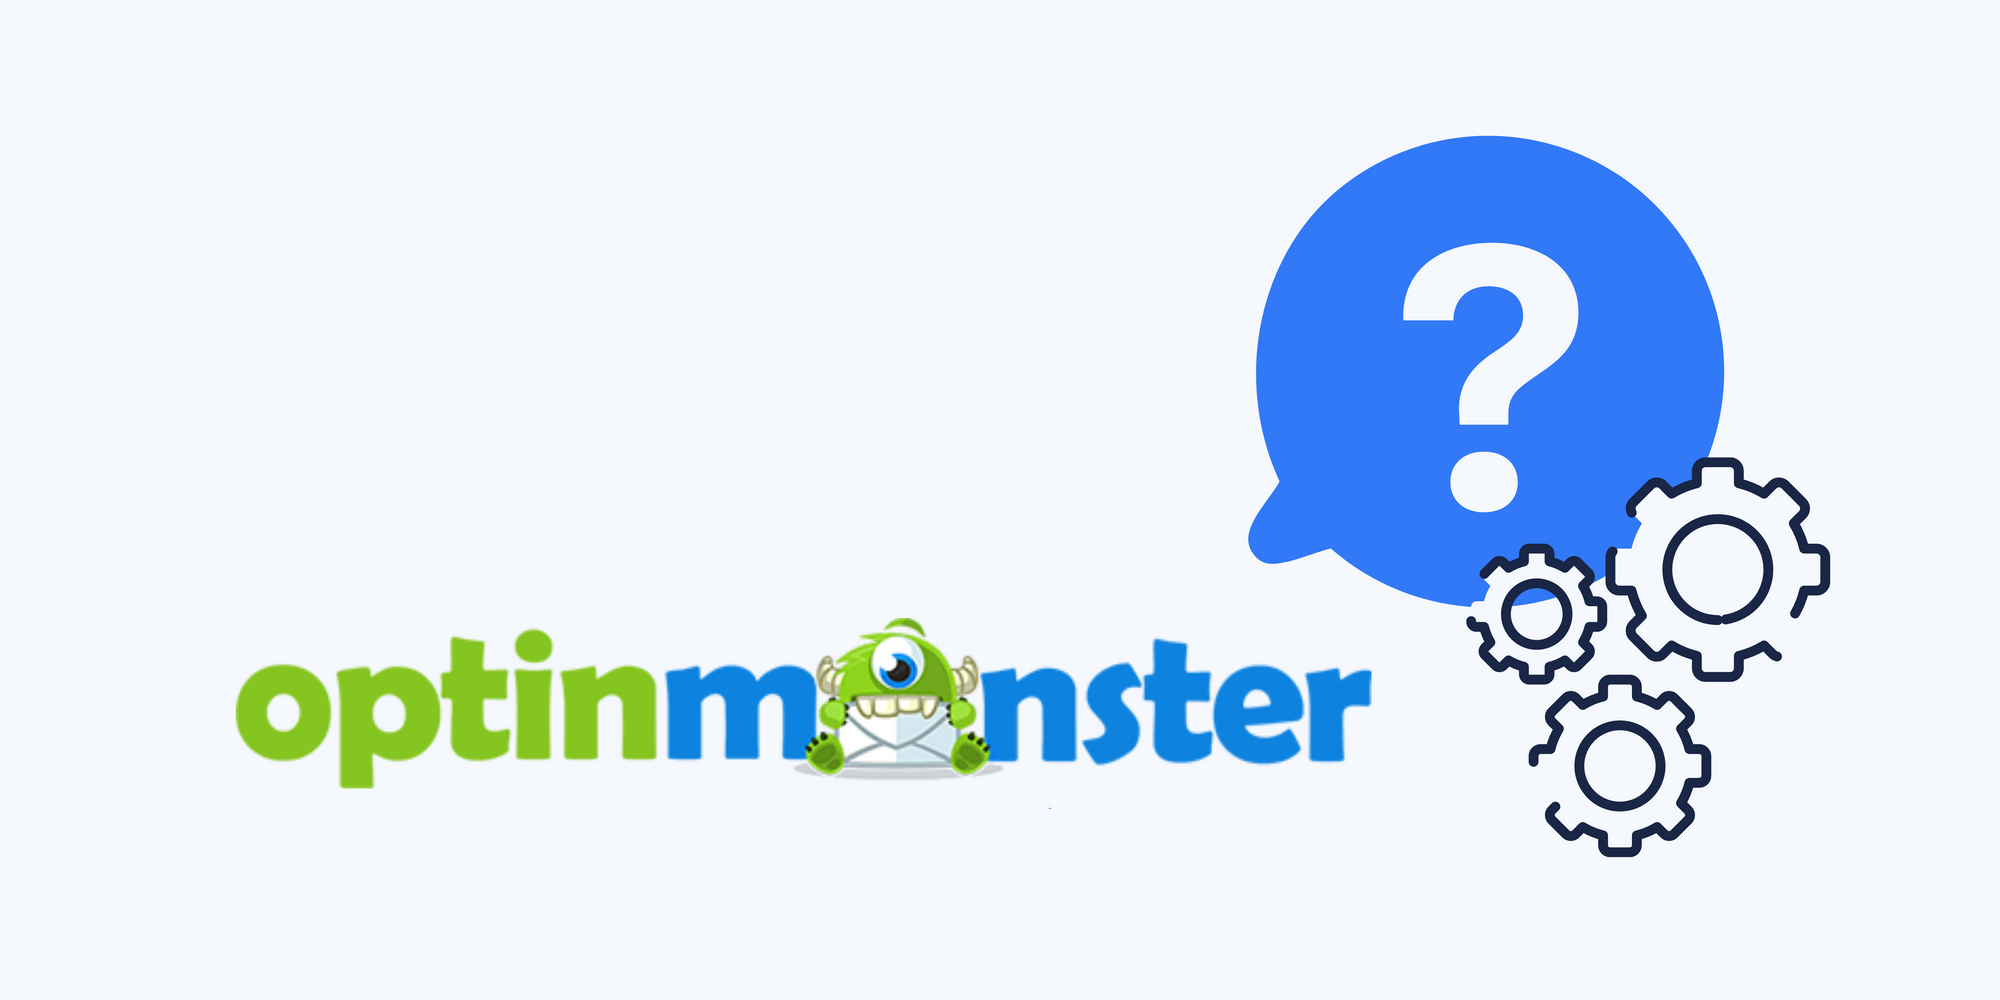 OptinMonster icon, a question mark and settings icon on blue background